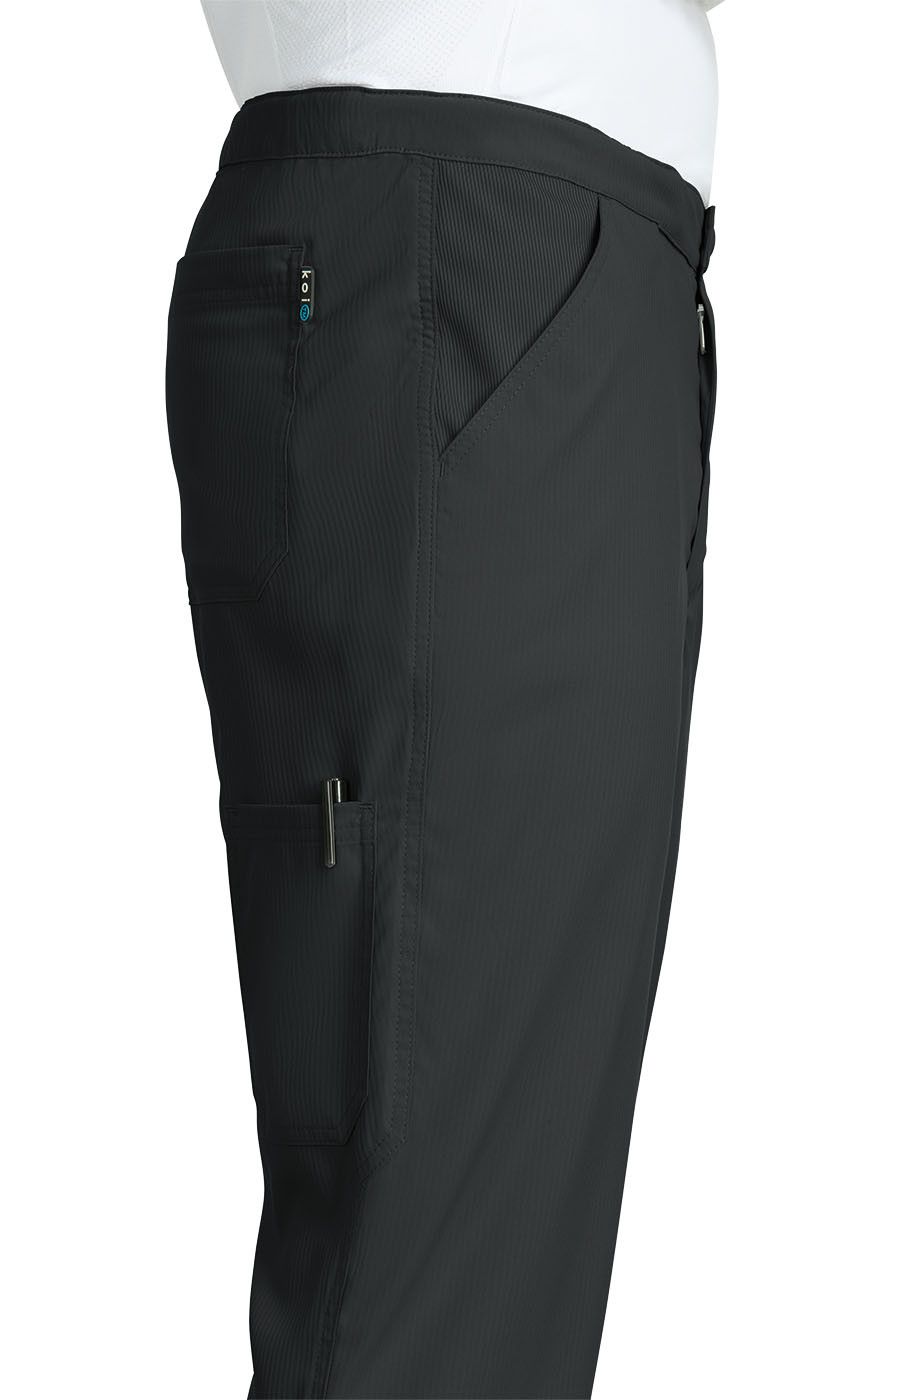 discovery-pant-black